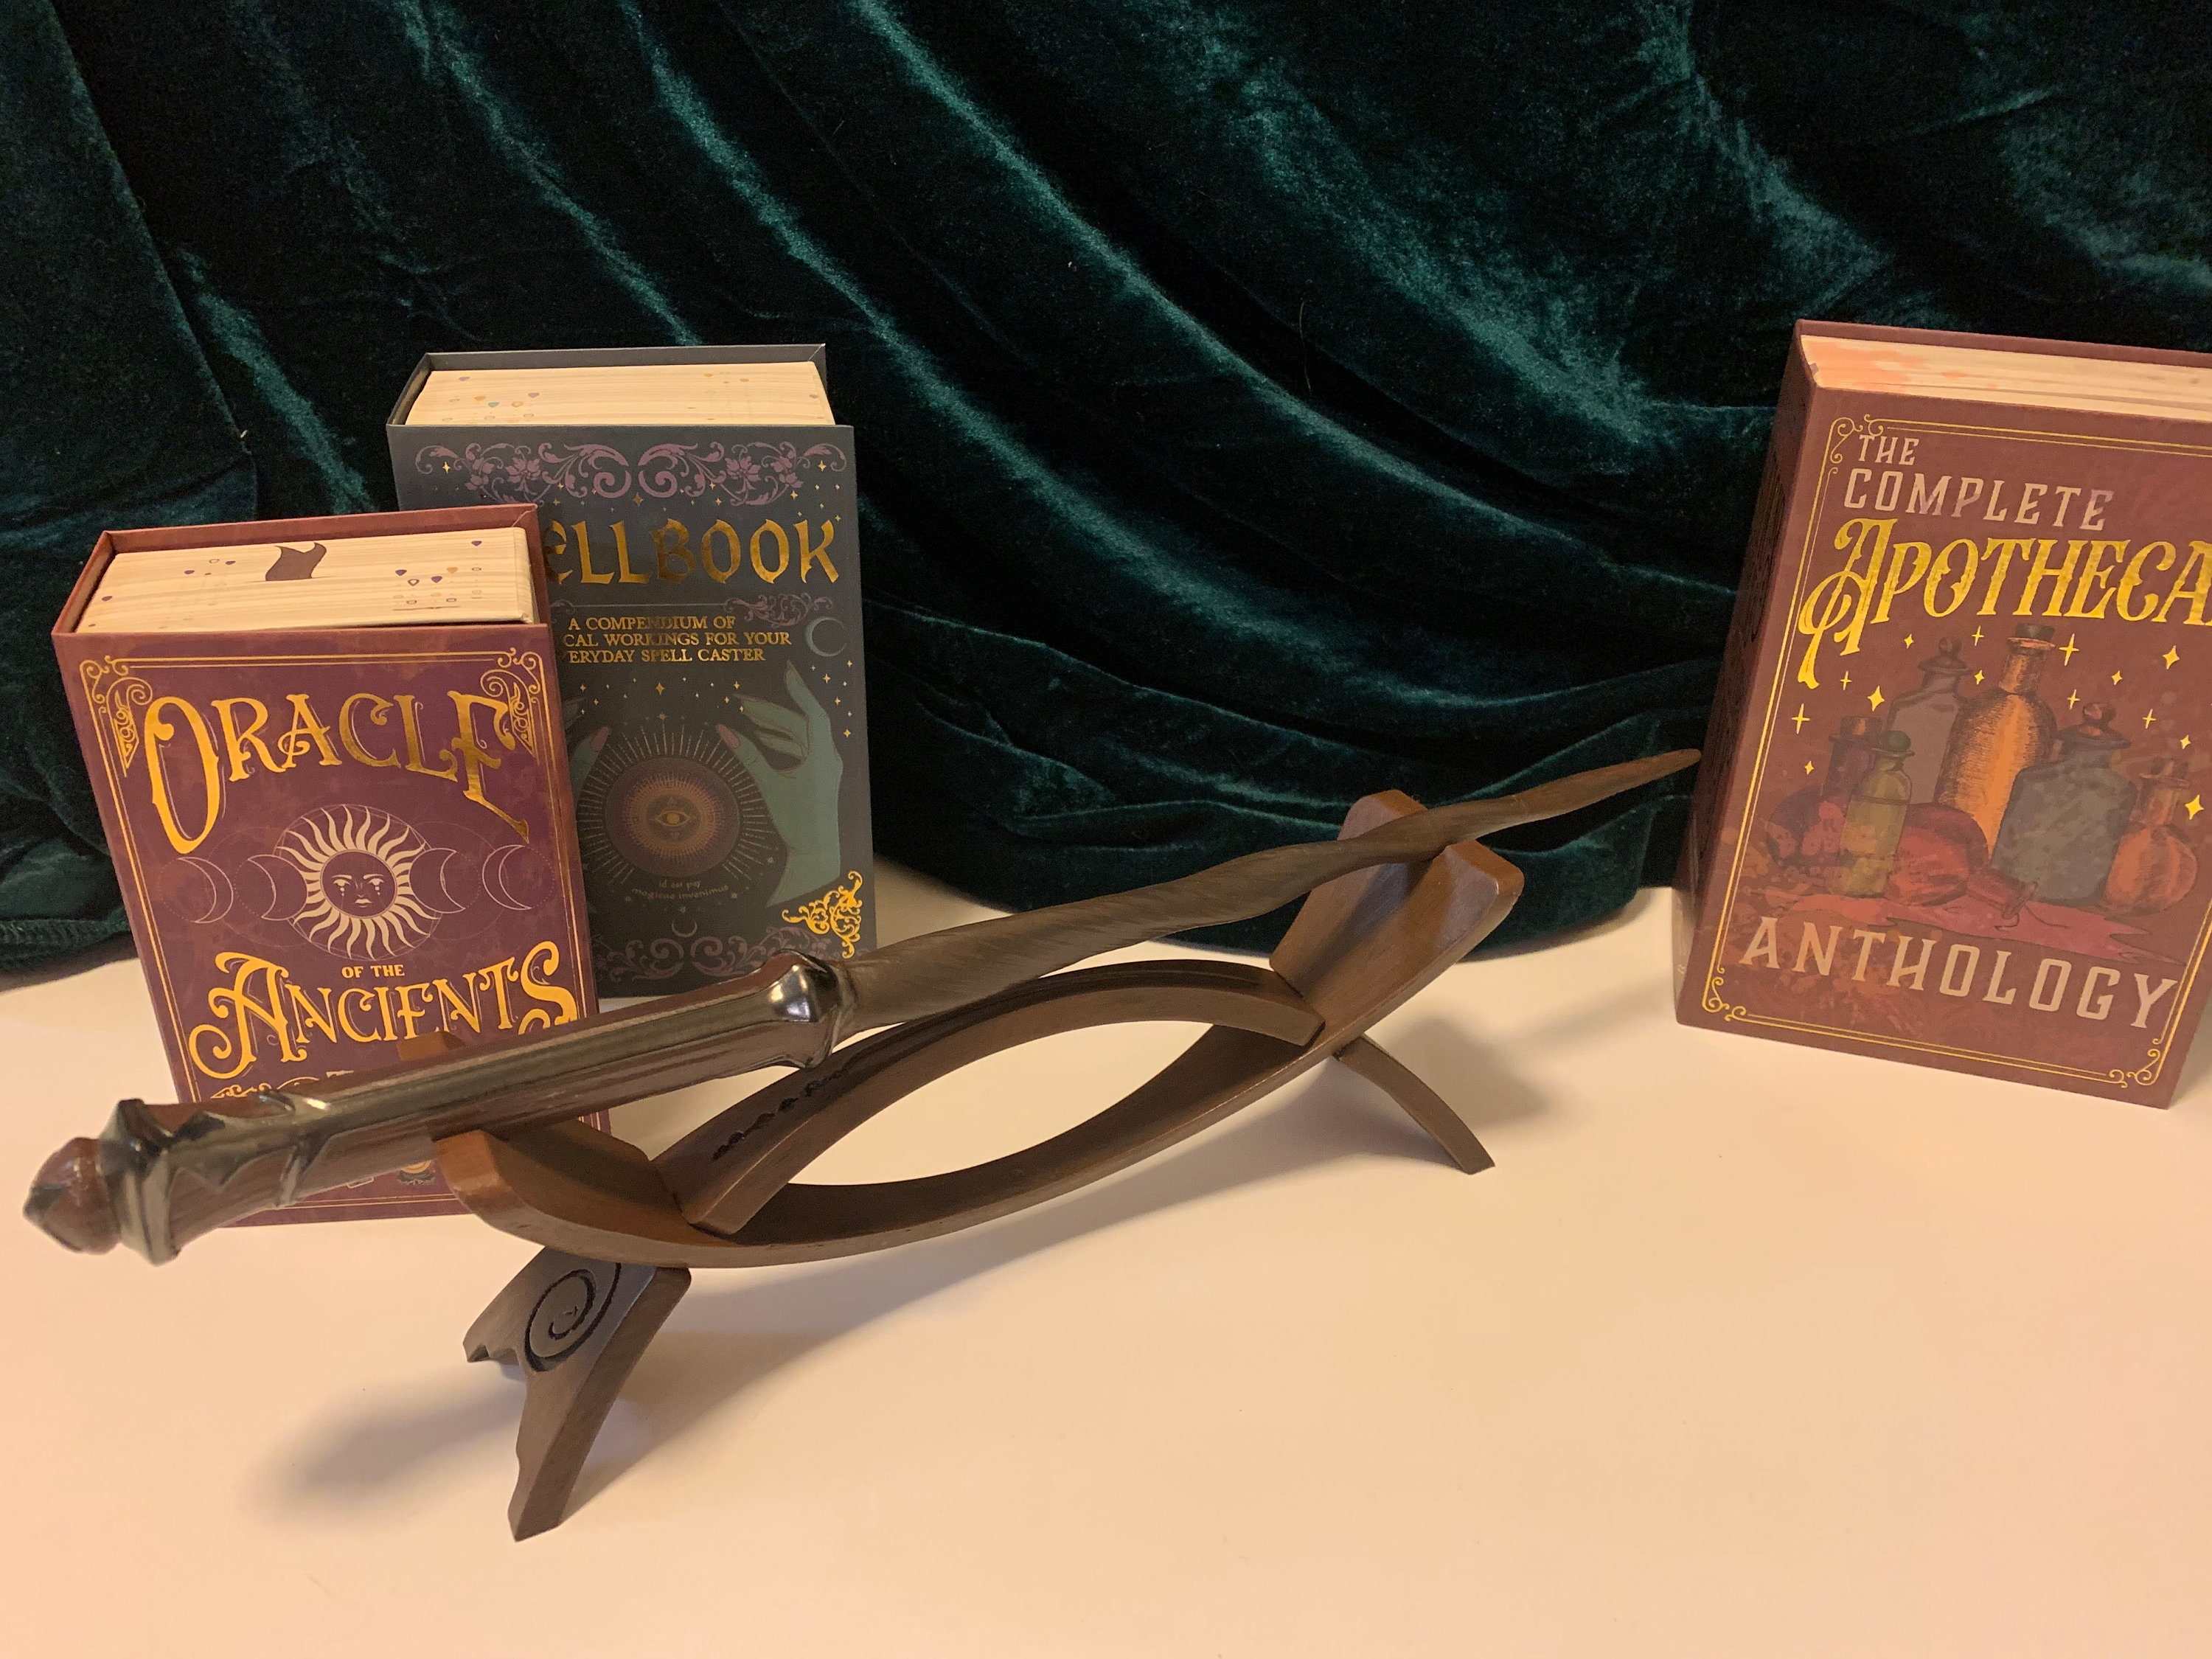 Wand Display Stand · GipsonWands · Online Store Powered by Storenvy